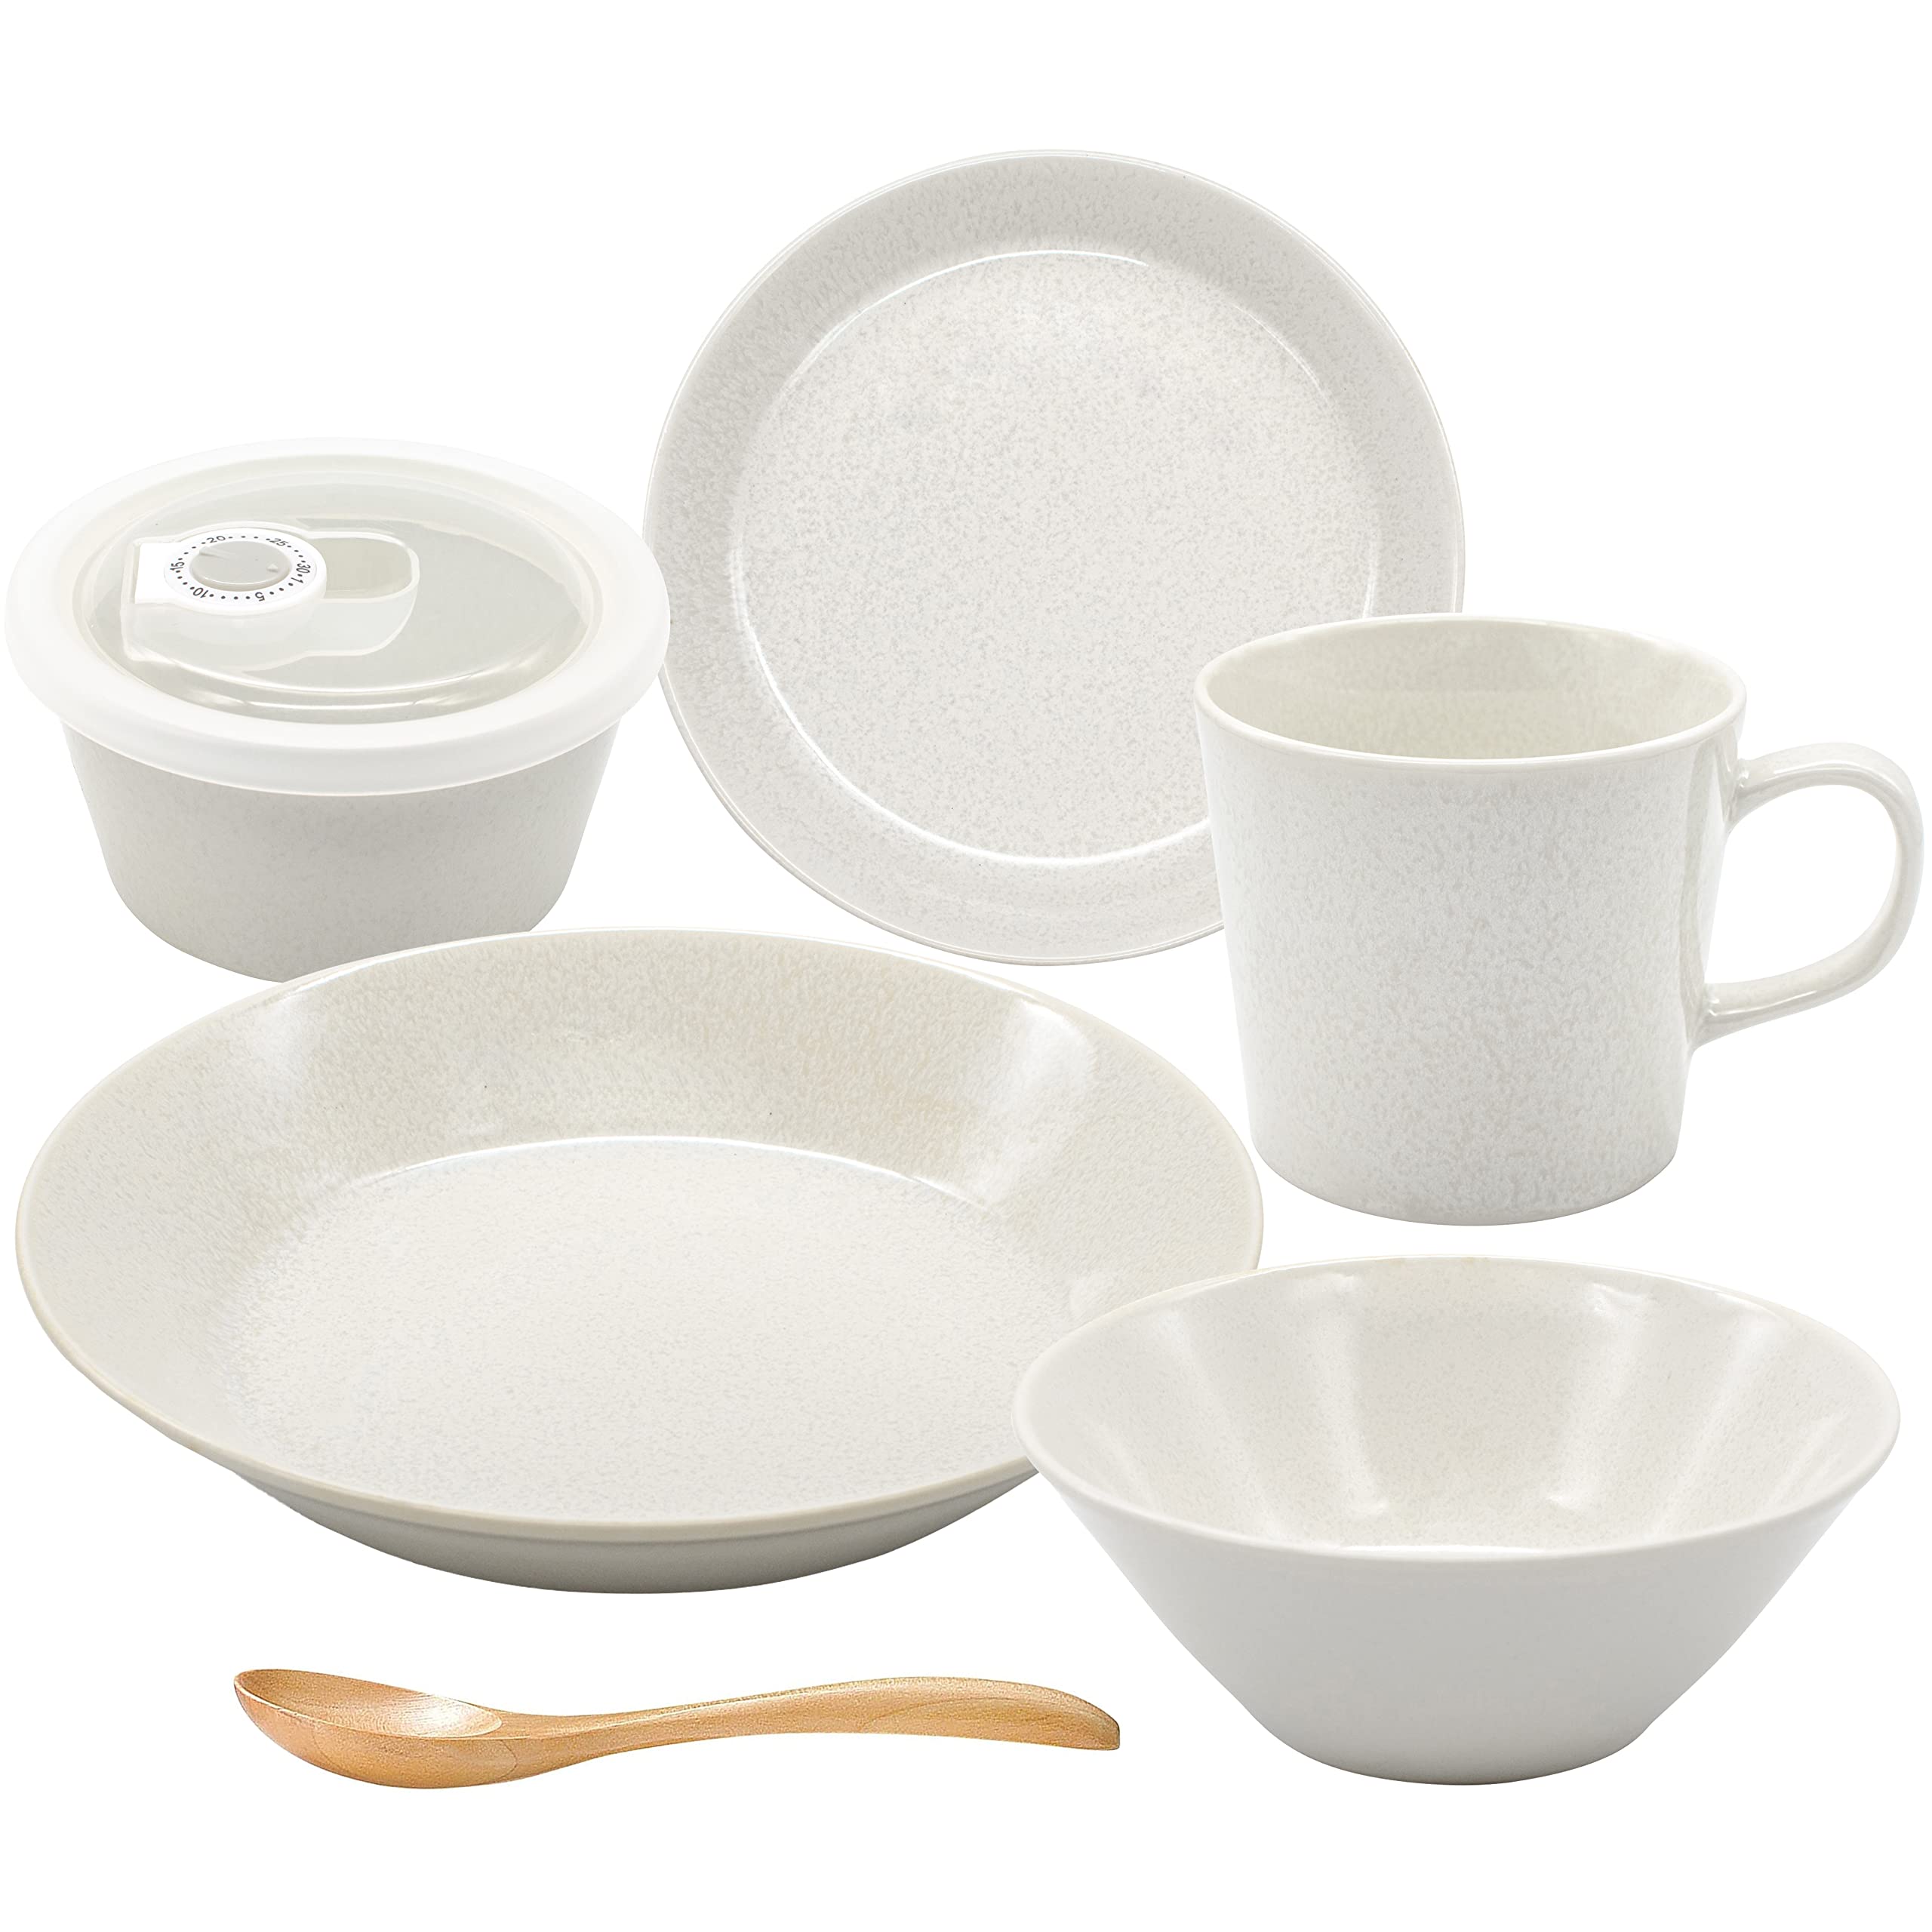 Aito Natural Color 6Pc Ivory White Mino Ware Tableware Set Dishwasher/Microwave Safe Made in Japan 567523